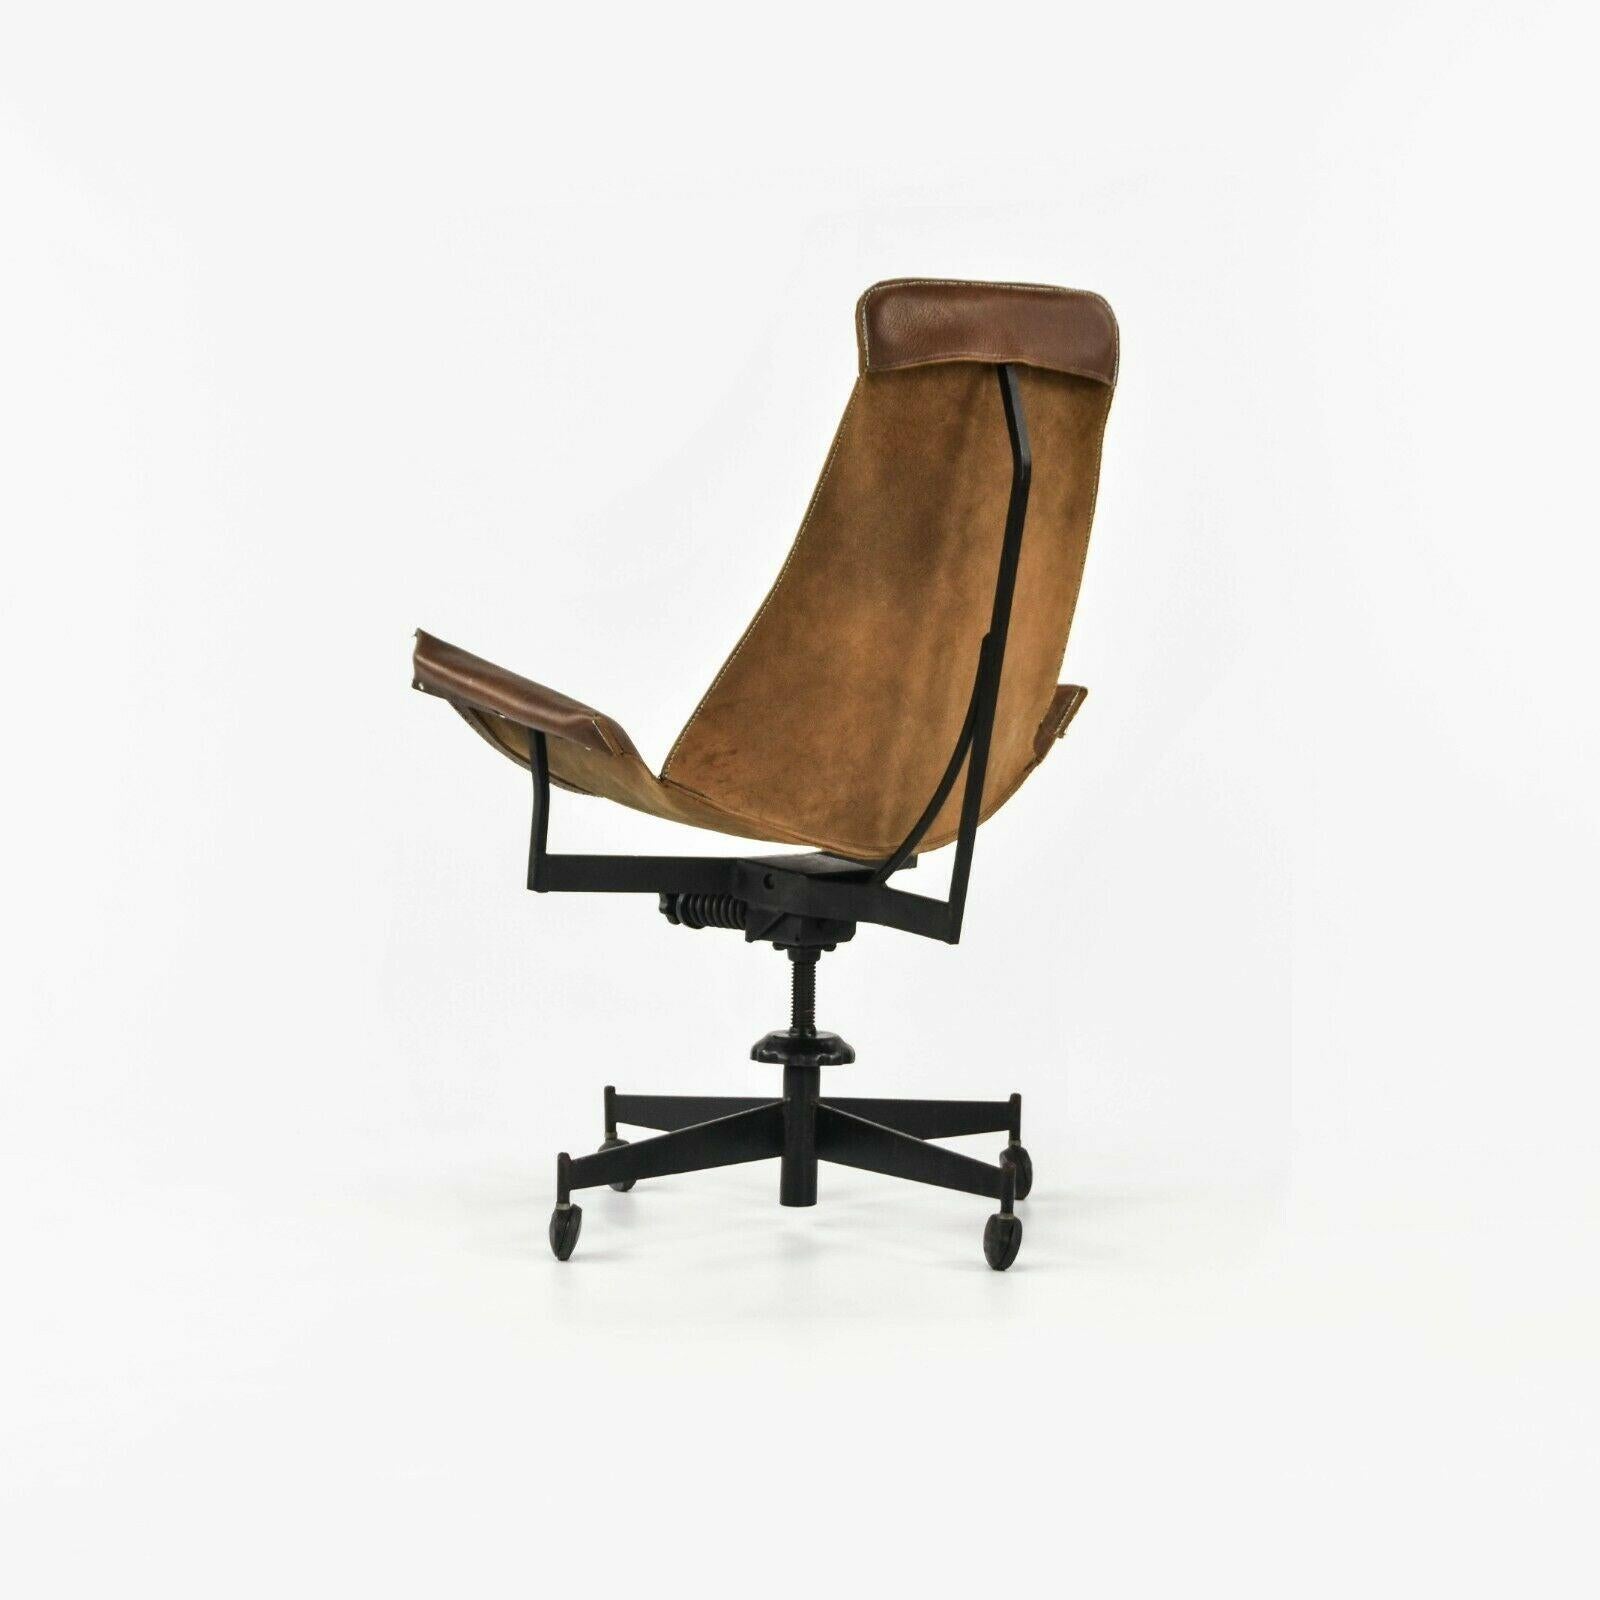 1969 William Katavolos Swivel K Chair Desk Chair for Leathercrafter w/ Sling In Good Condition For Sale In Philadelphia, PA